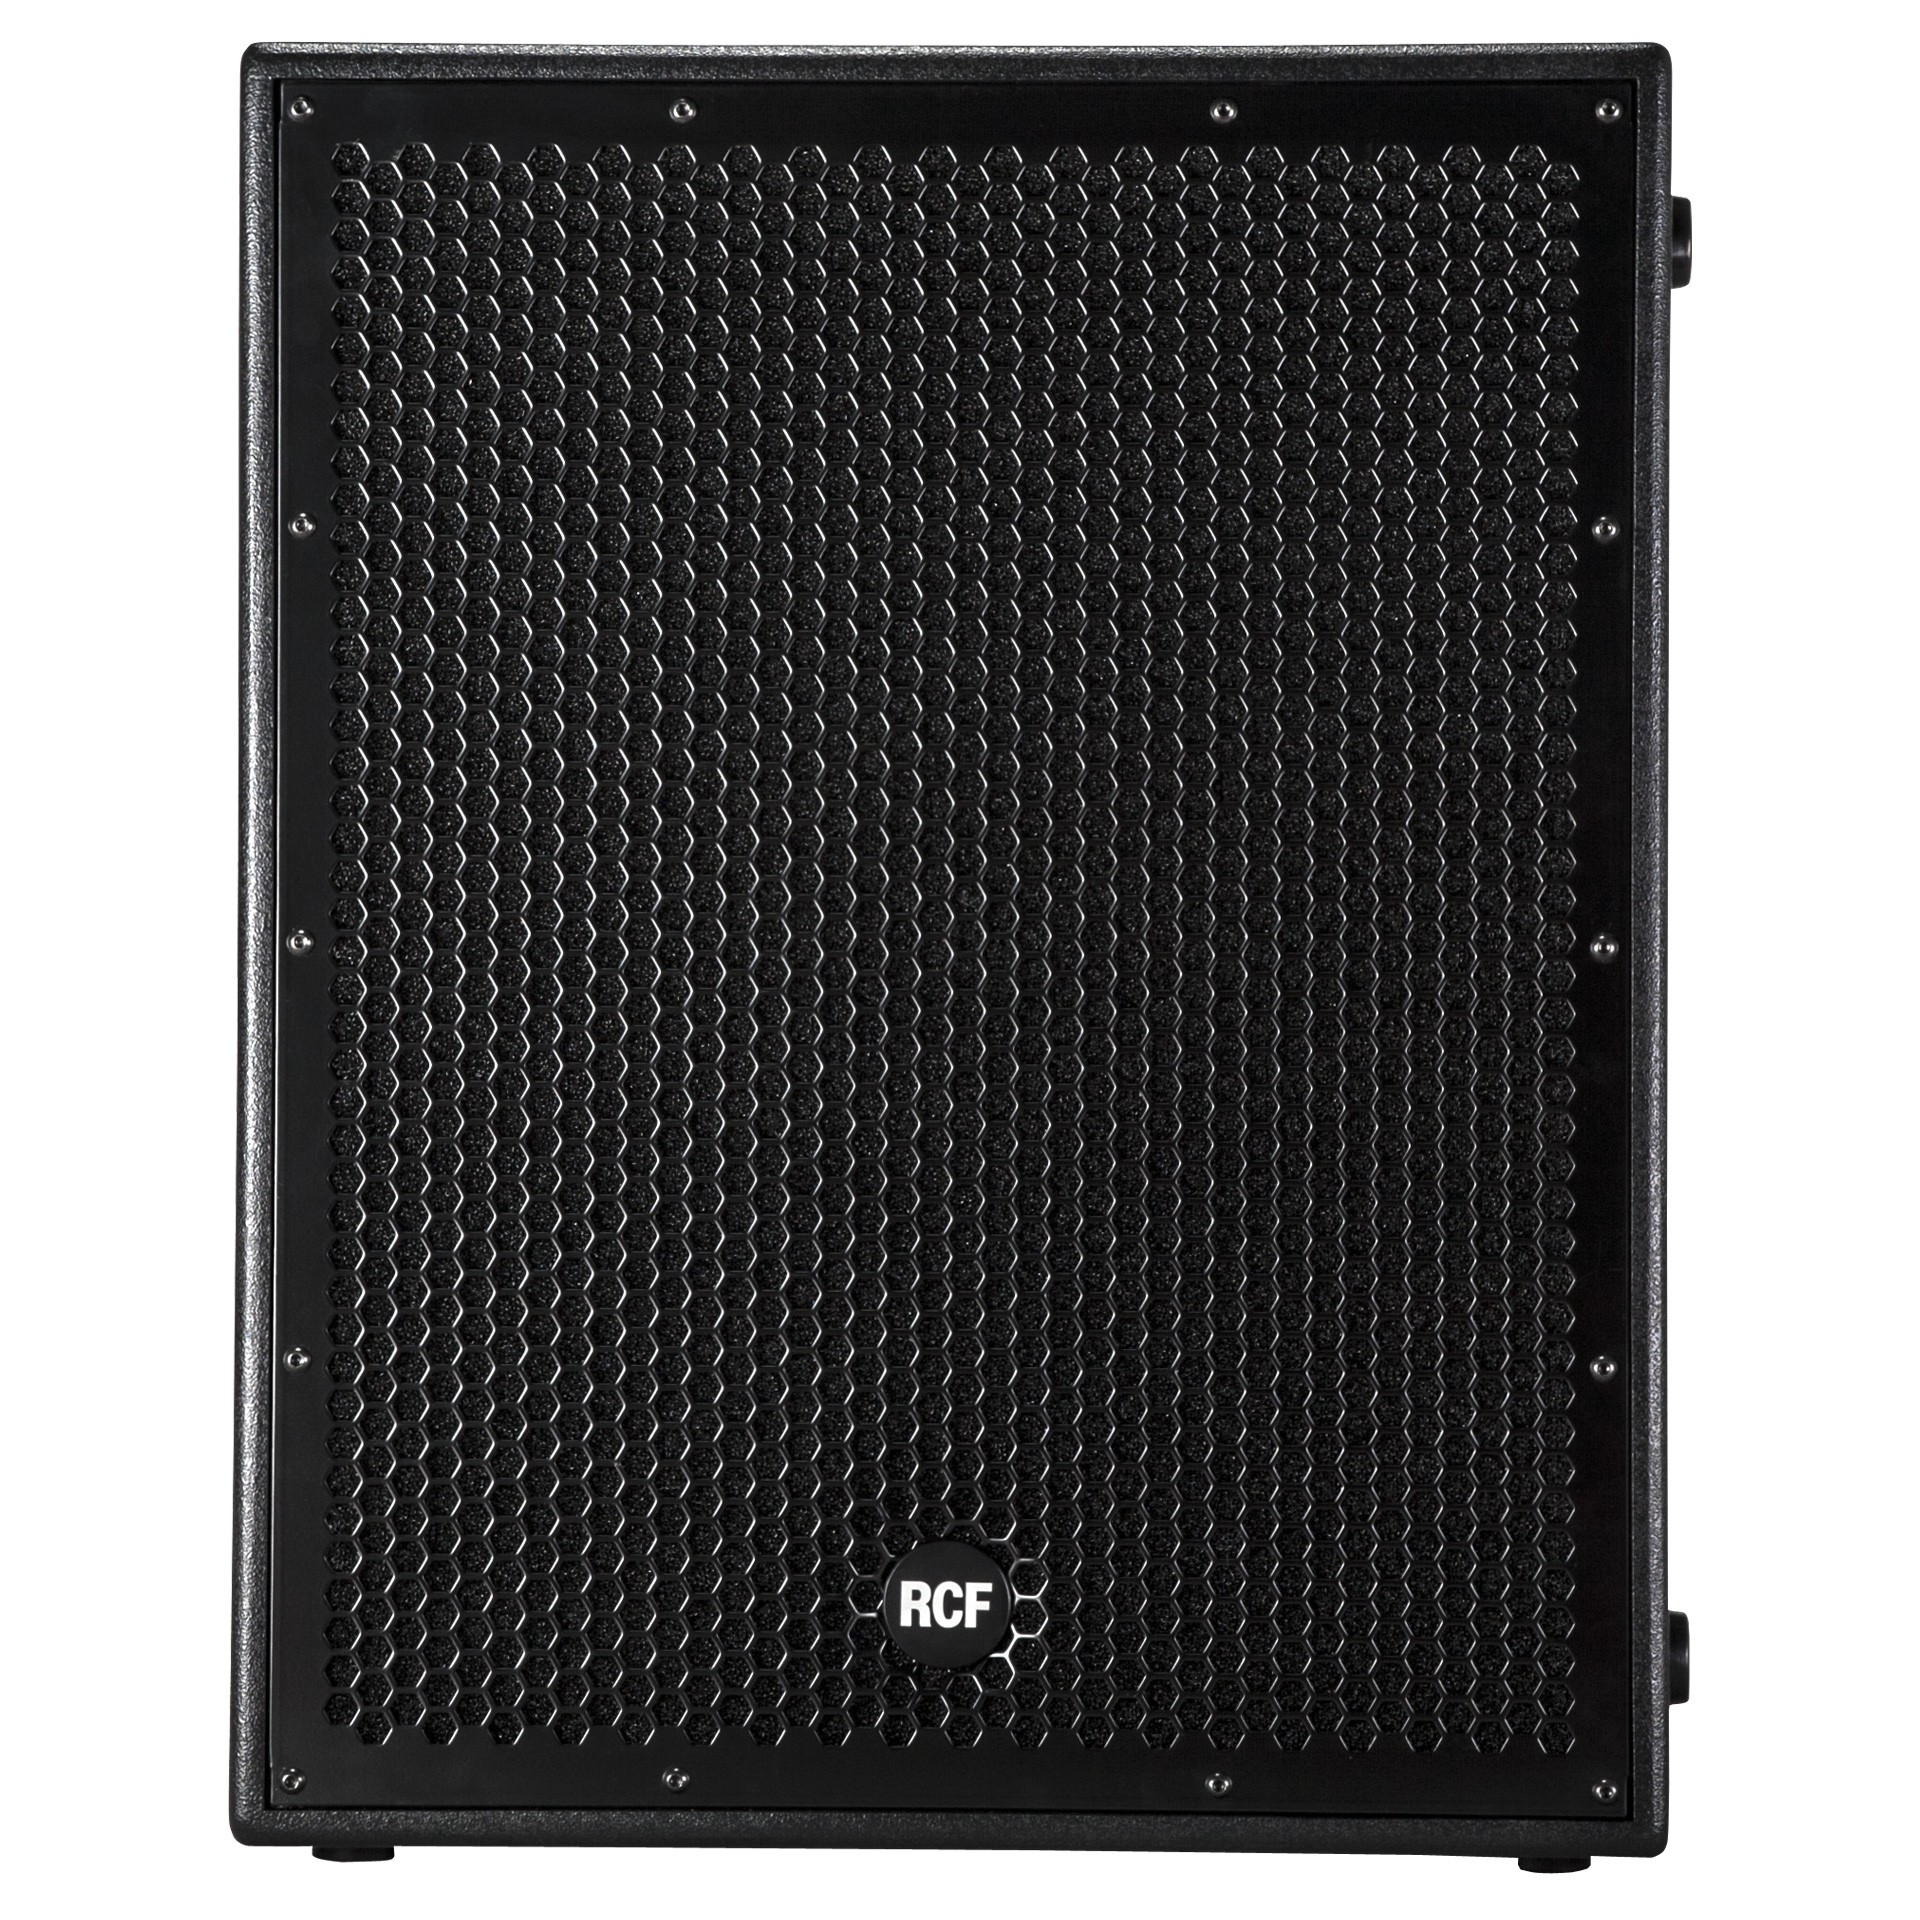 Subwoofere pro - Subwoofer activ RCF SUB 8004-AS II, audioclub.ro